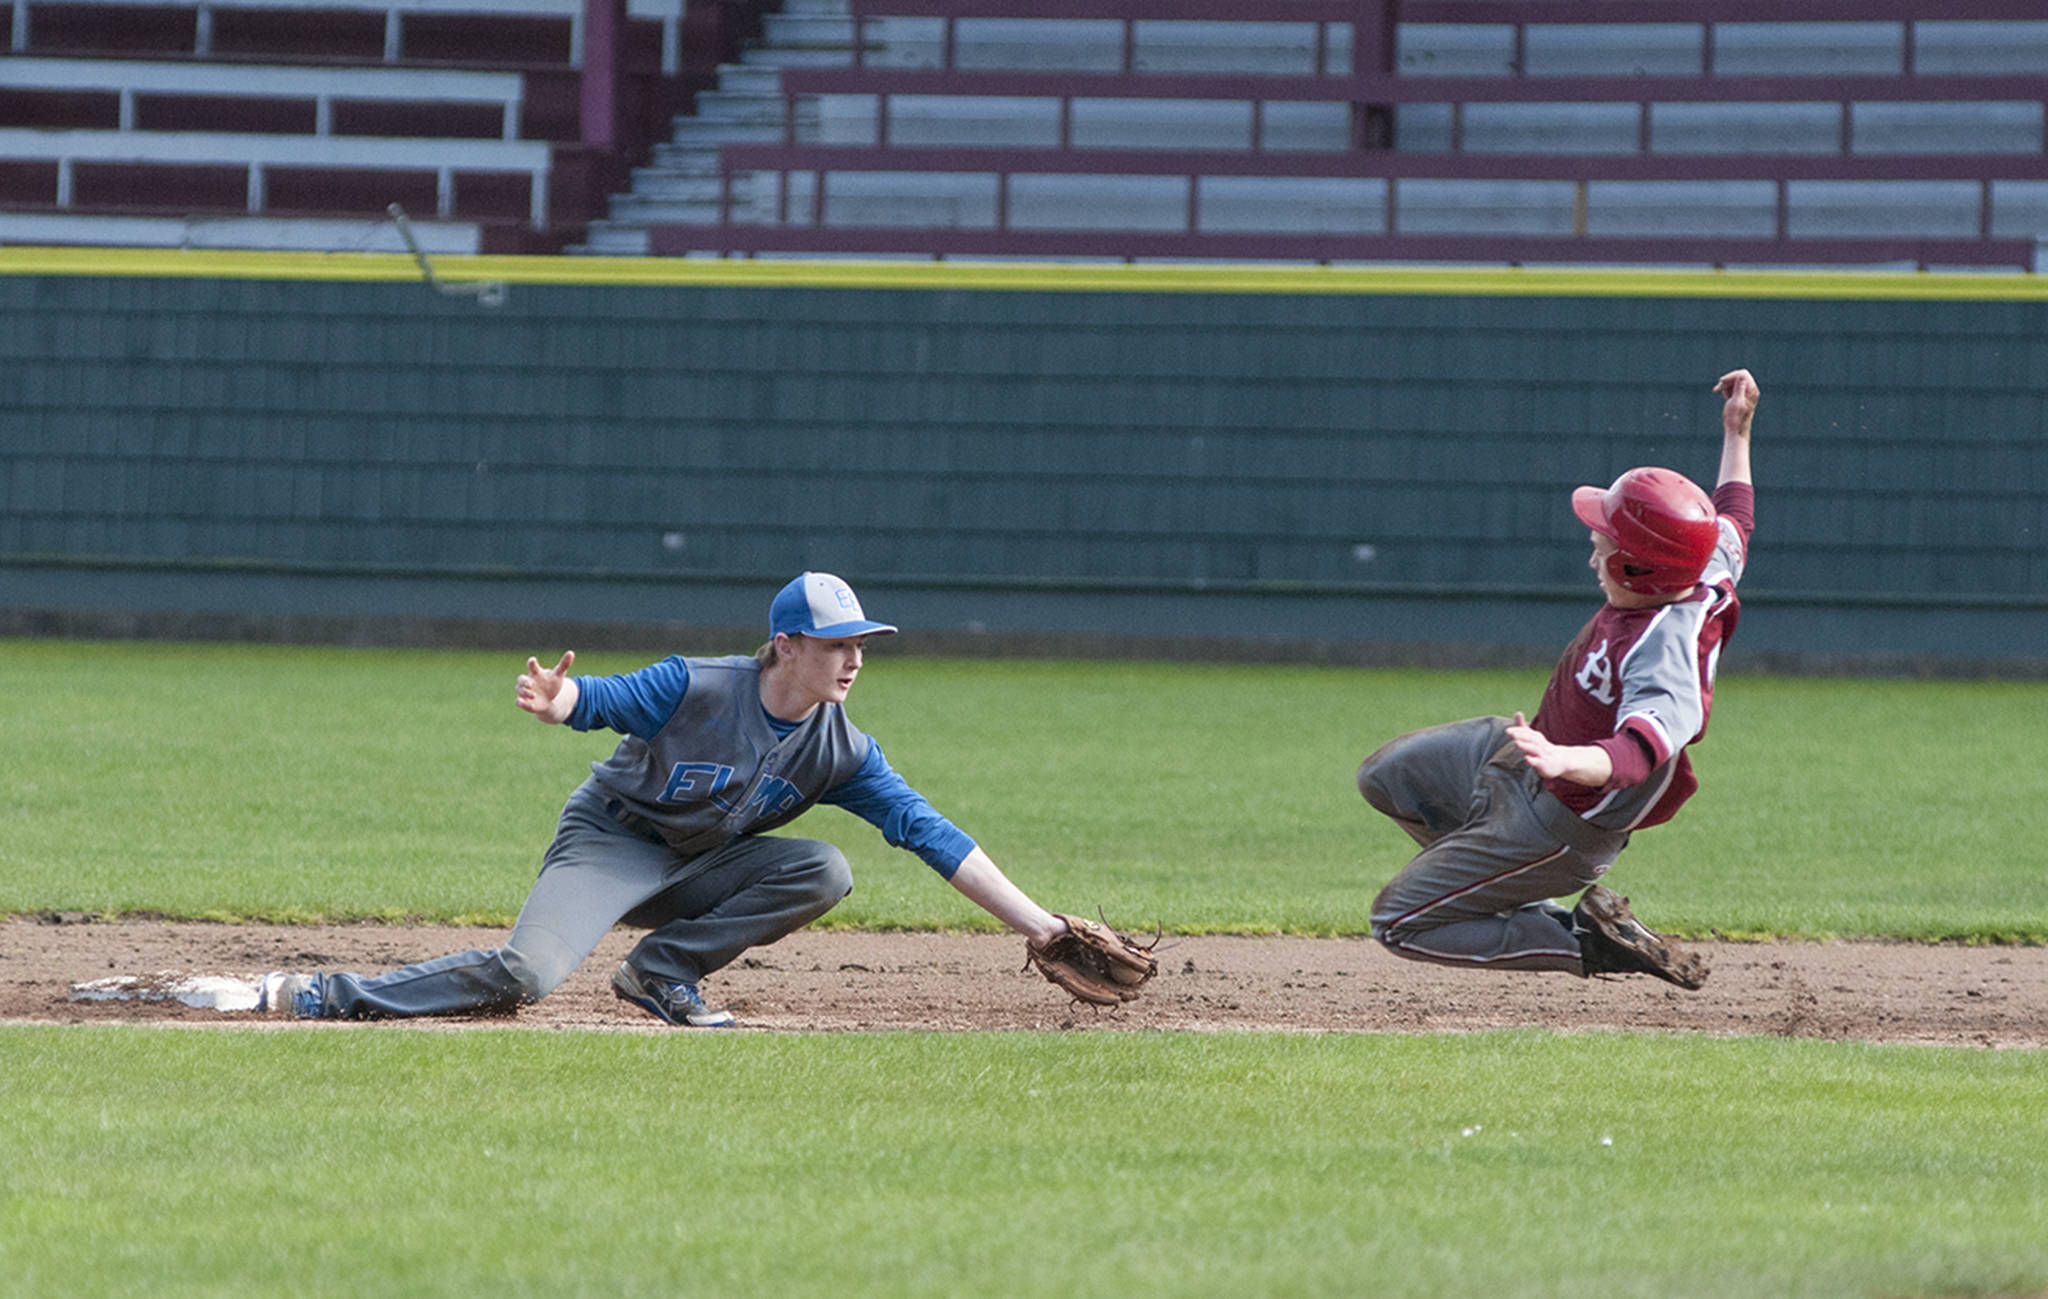 (Brendan Carl | The Daily World) Elma’s Colten French waits to tag Hoquiam’s Jackson Folkers out at second base. Elma defeated Hoquiam 3-0 in the first game on Thursday before the Grizzlies won the nightcap 17-1.